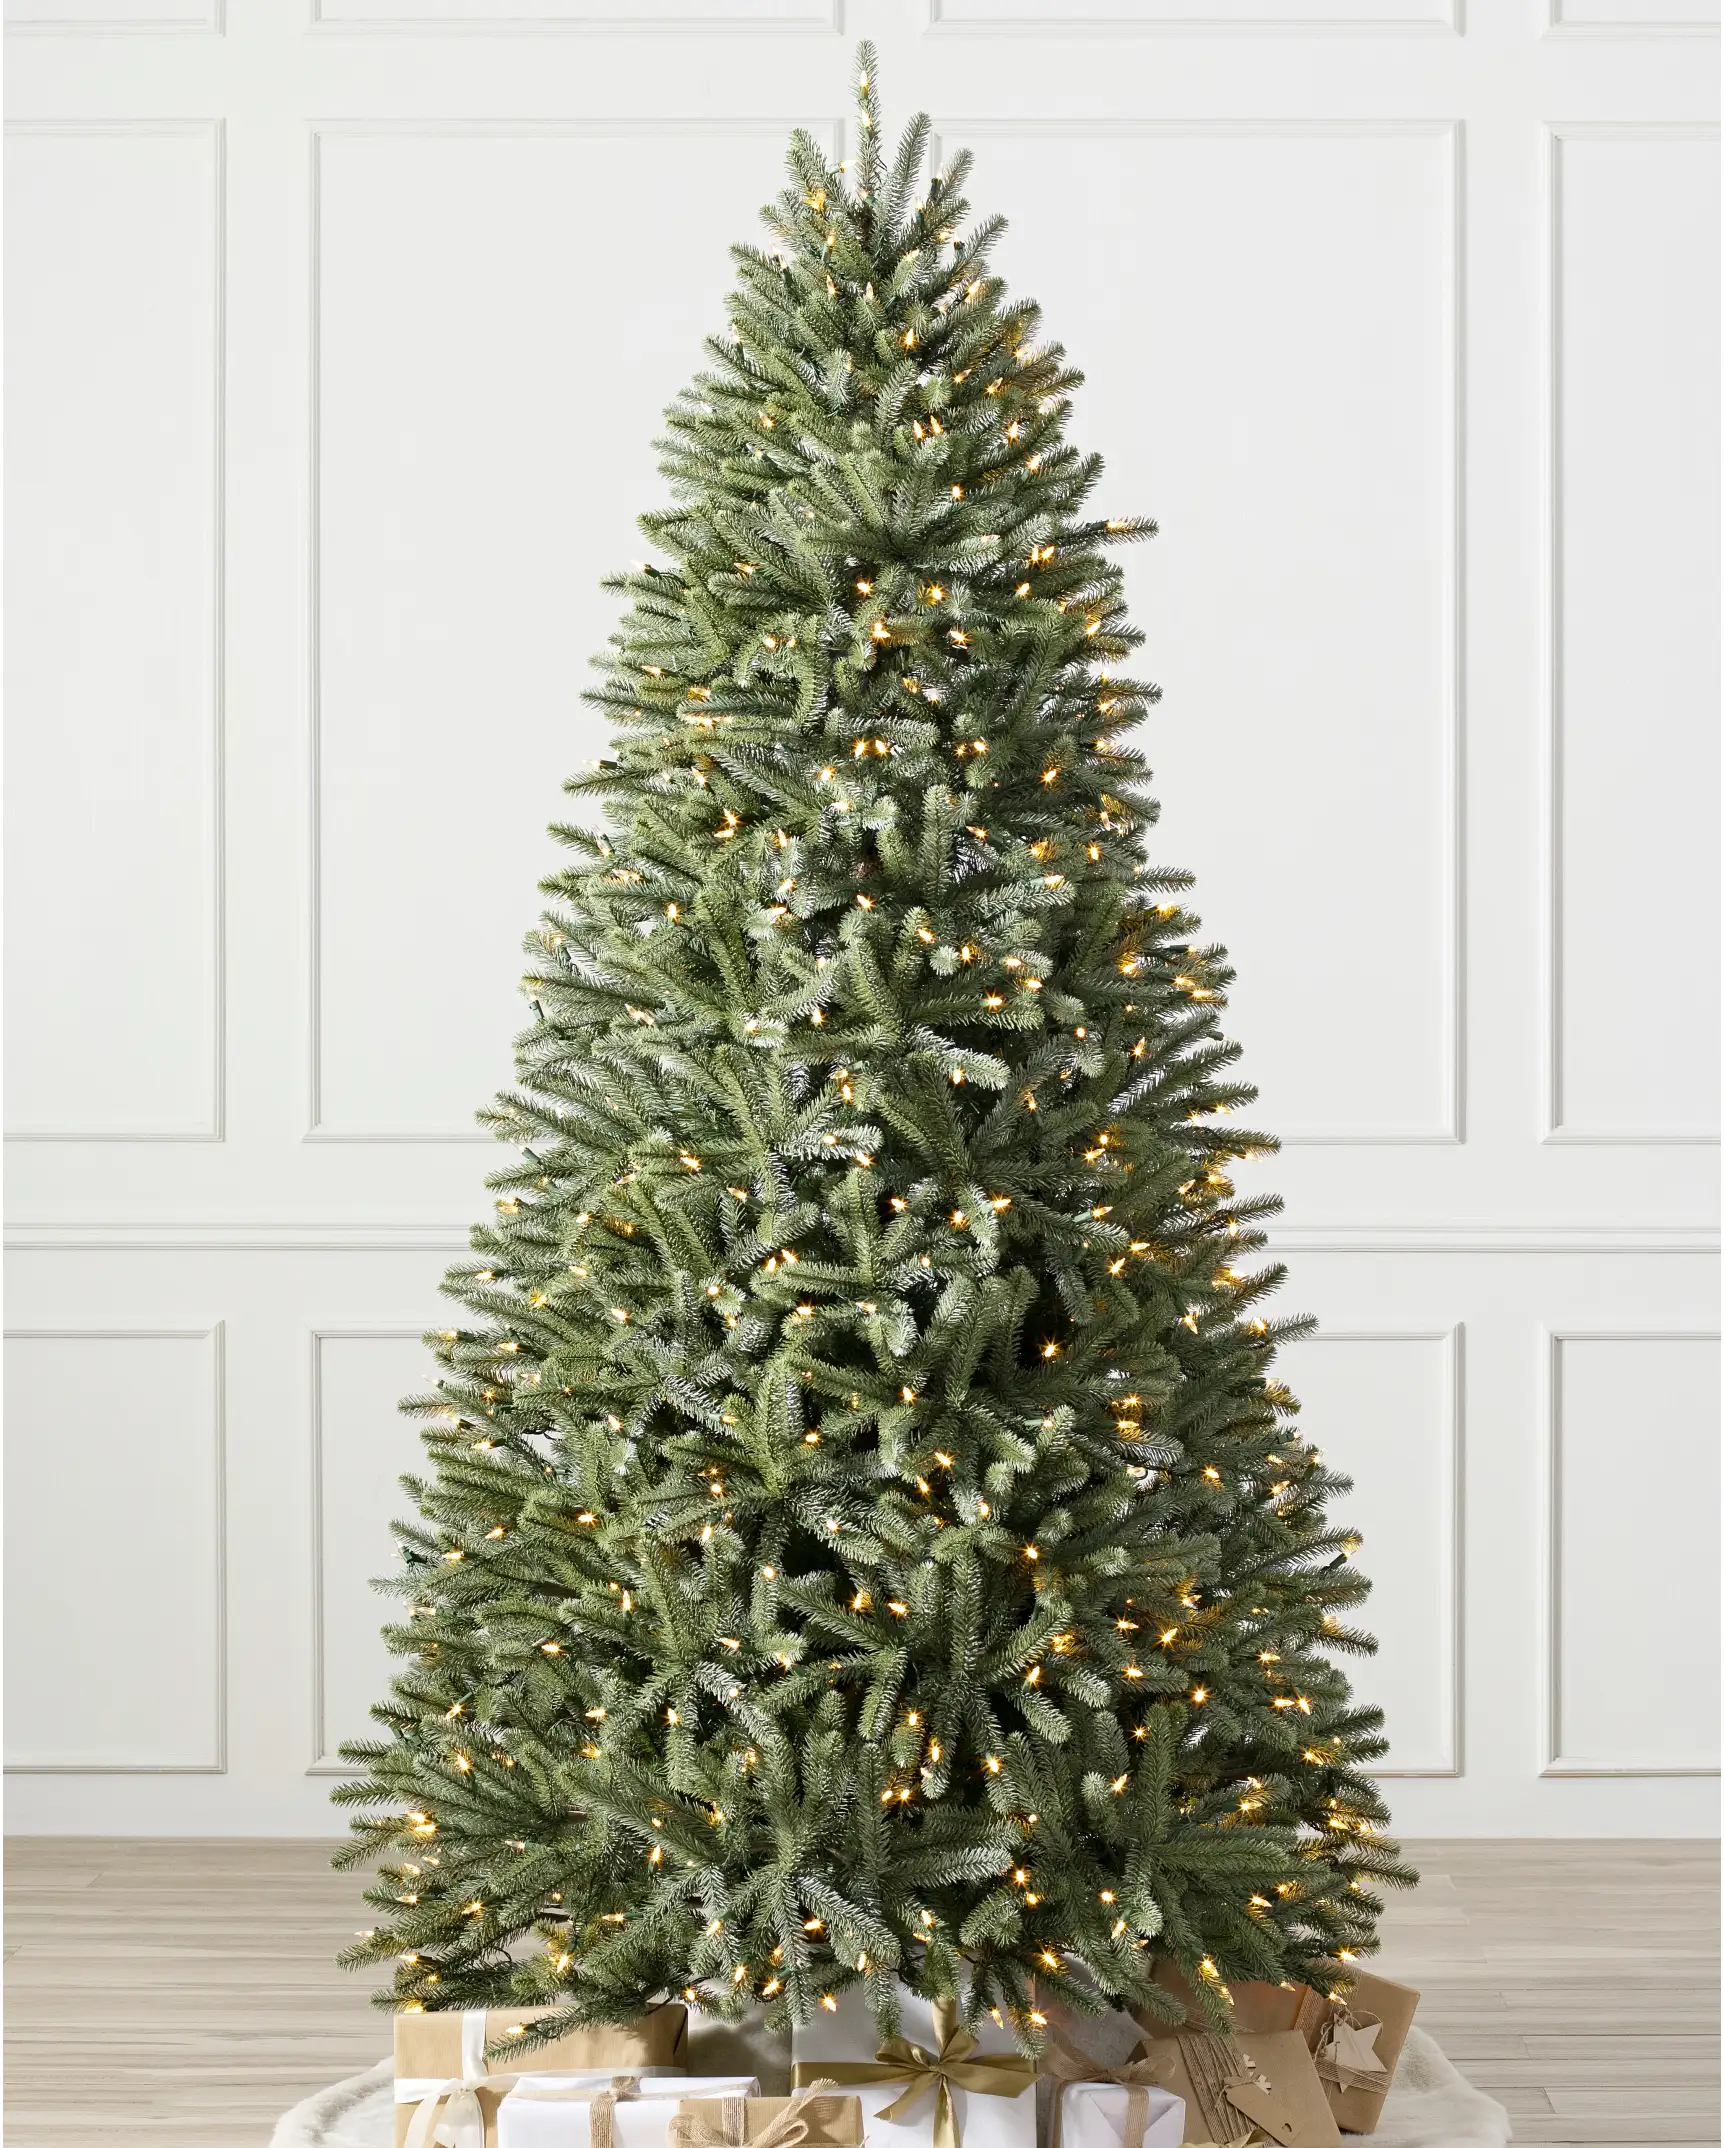 Where Can You Buy Balsam Hill Christmas Trees?